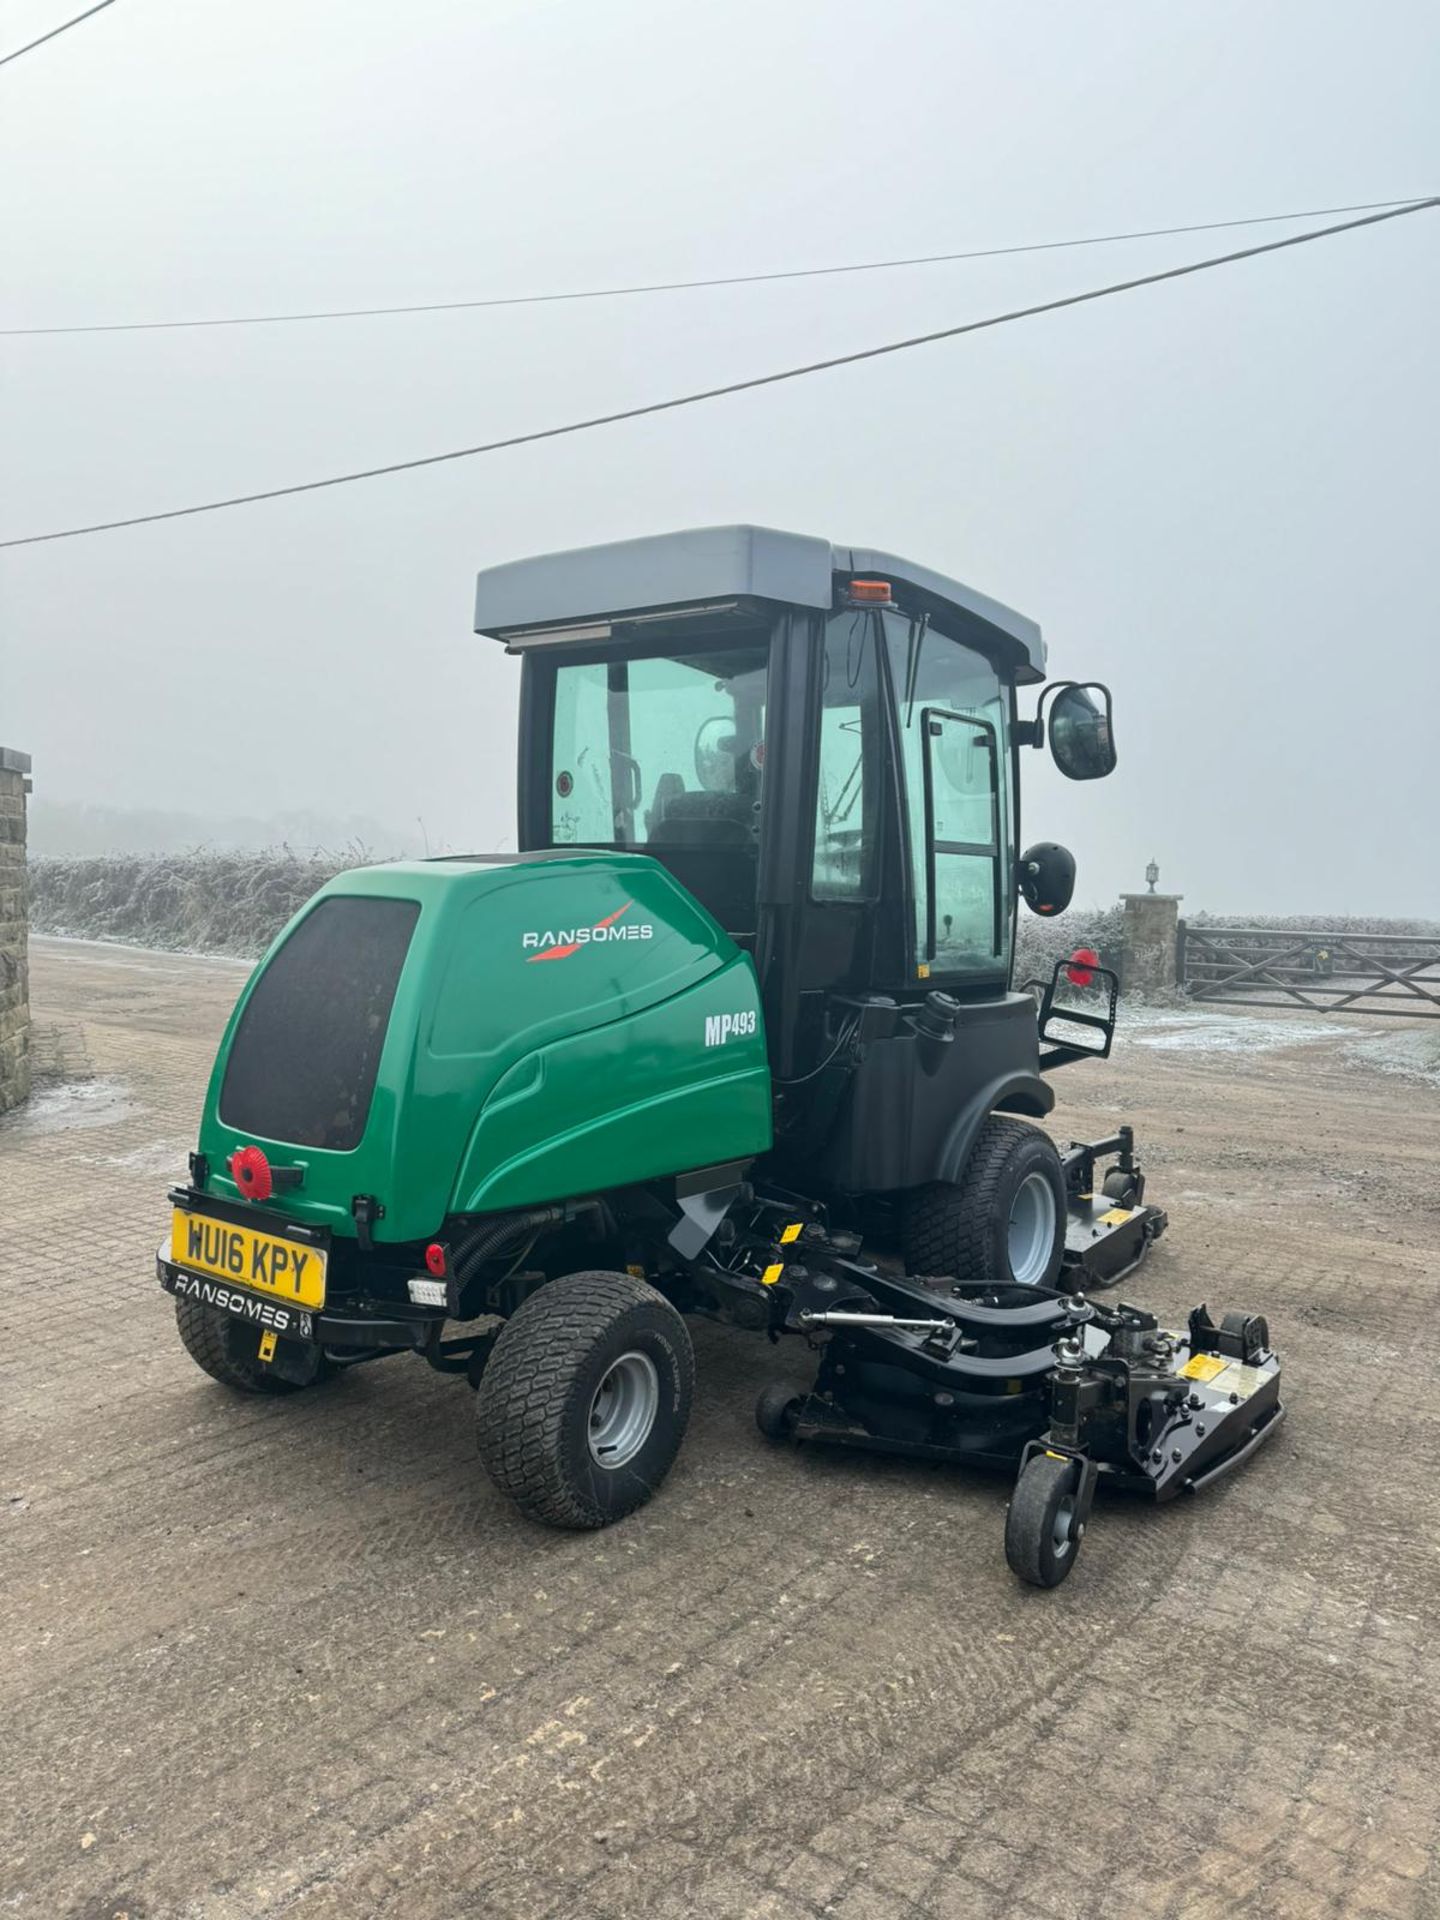 2016 RANSOMES RMP493 BATWING RIDE ON LAWN MOWER WITH FULL GLASS CAB *PLUS VAT* - Image 18 of 33